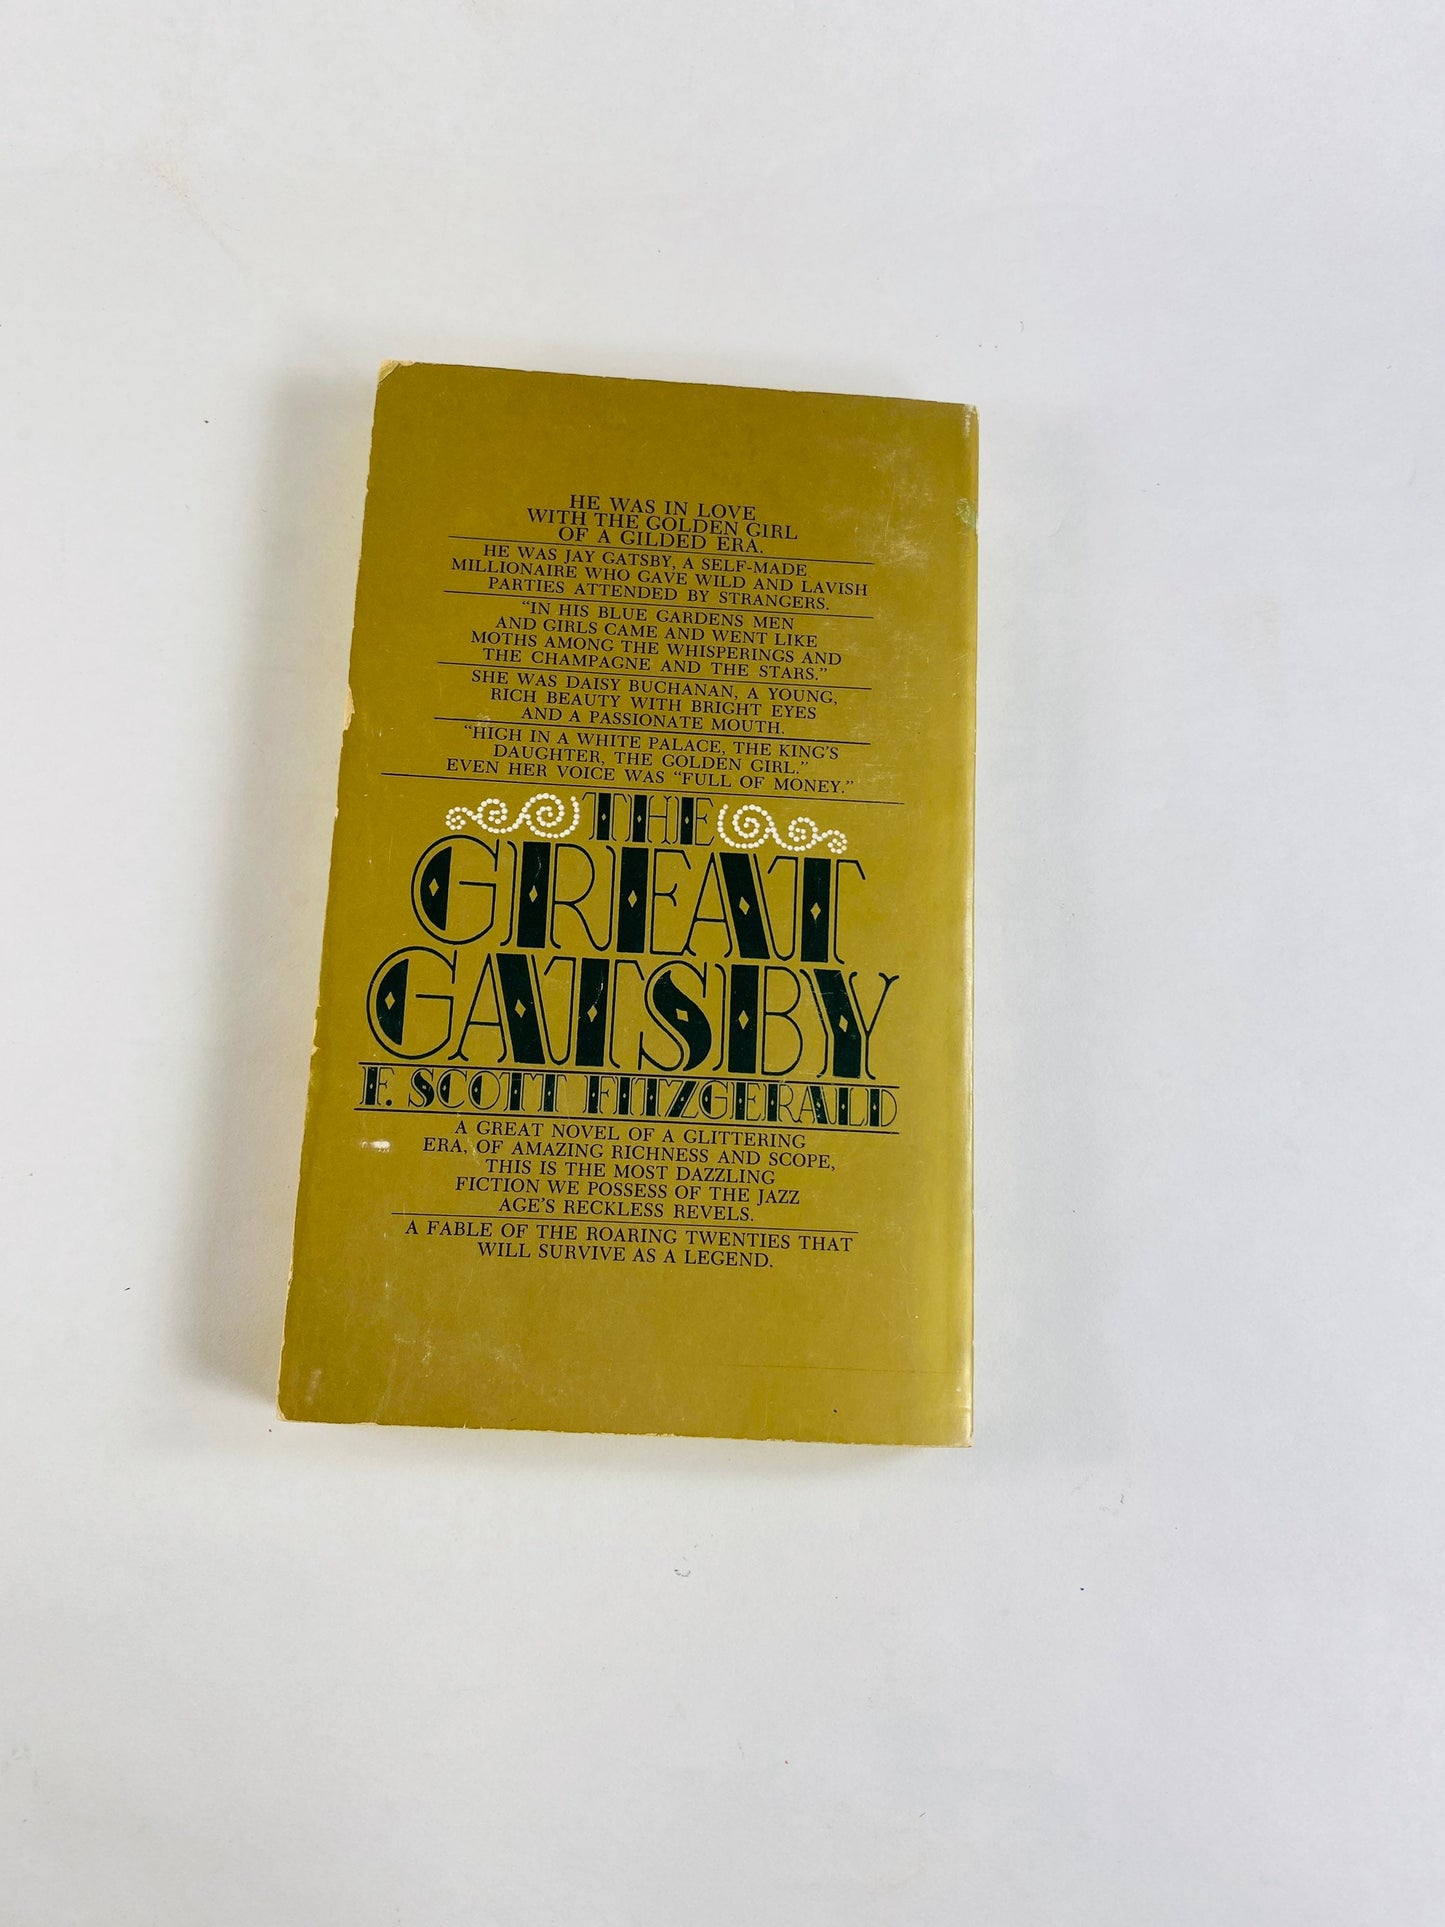 Great Gatsby by F Scott Fitzgerald Vintage paperback book circa 1974 Bantam edition with Paramount Pictures movie cover